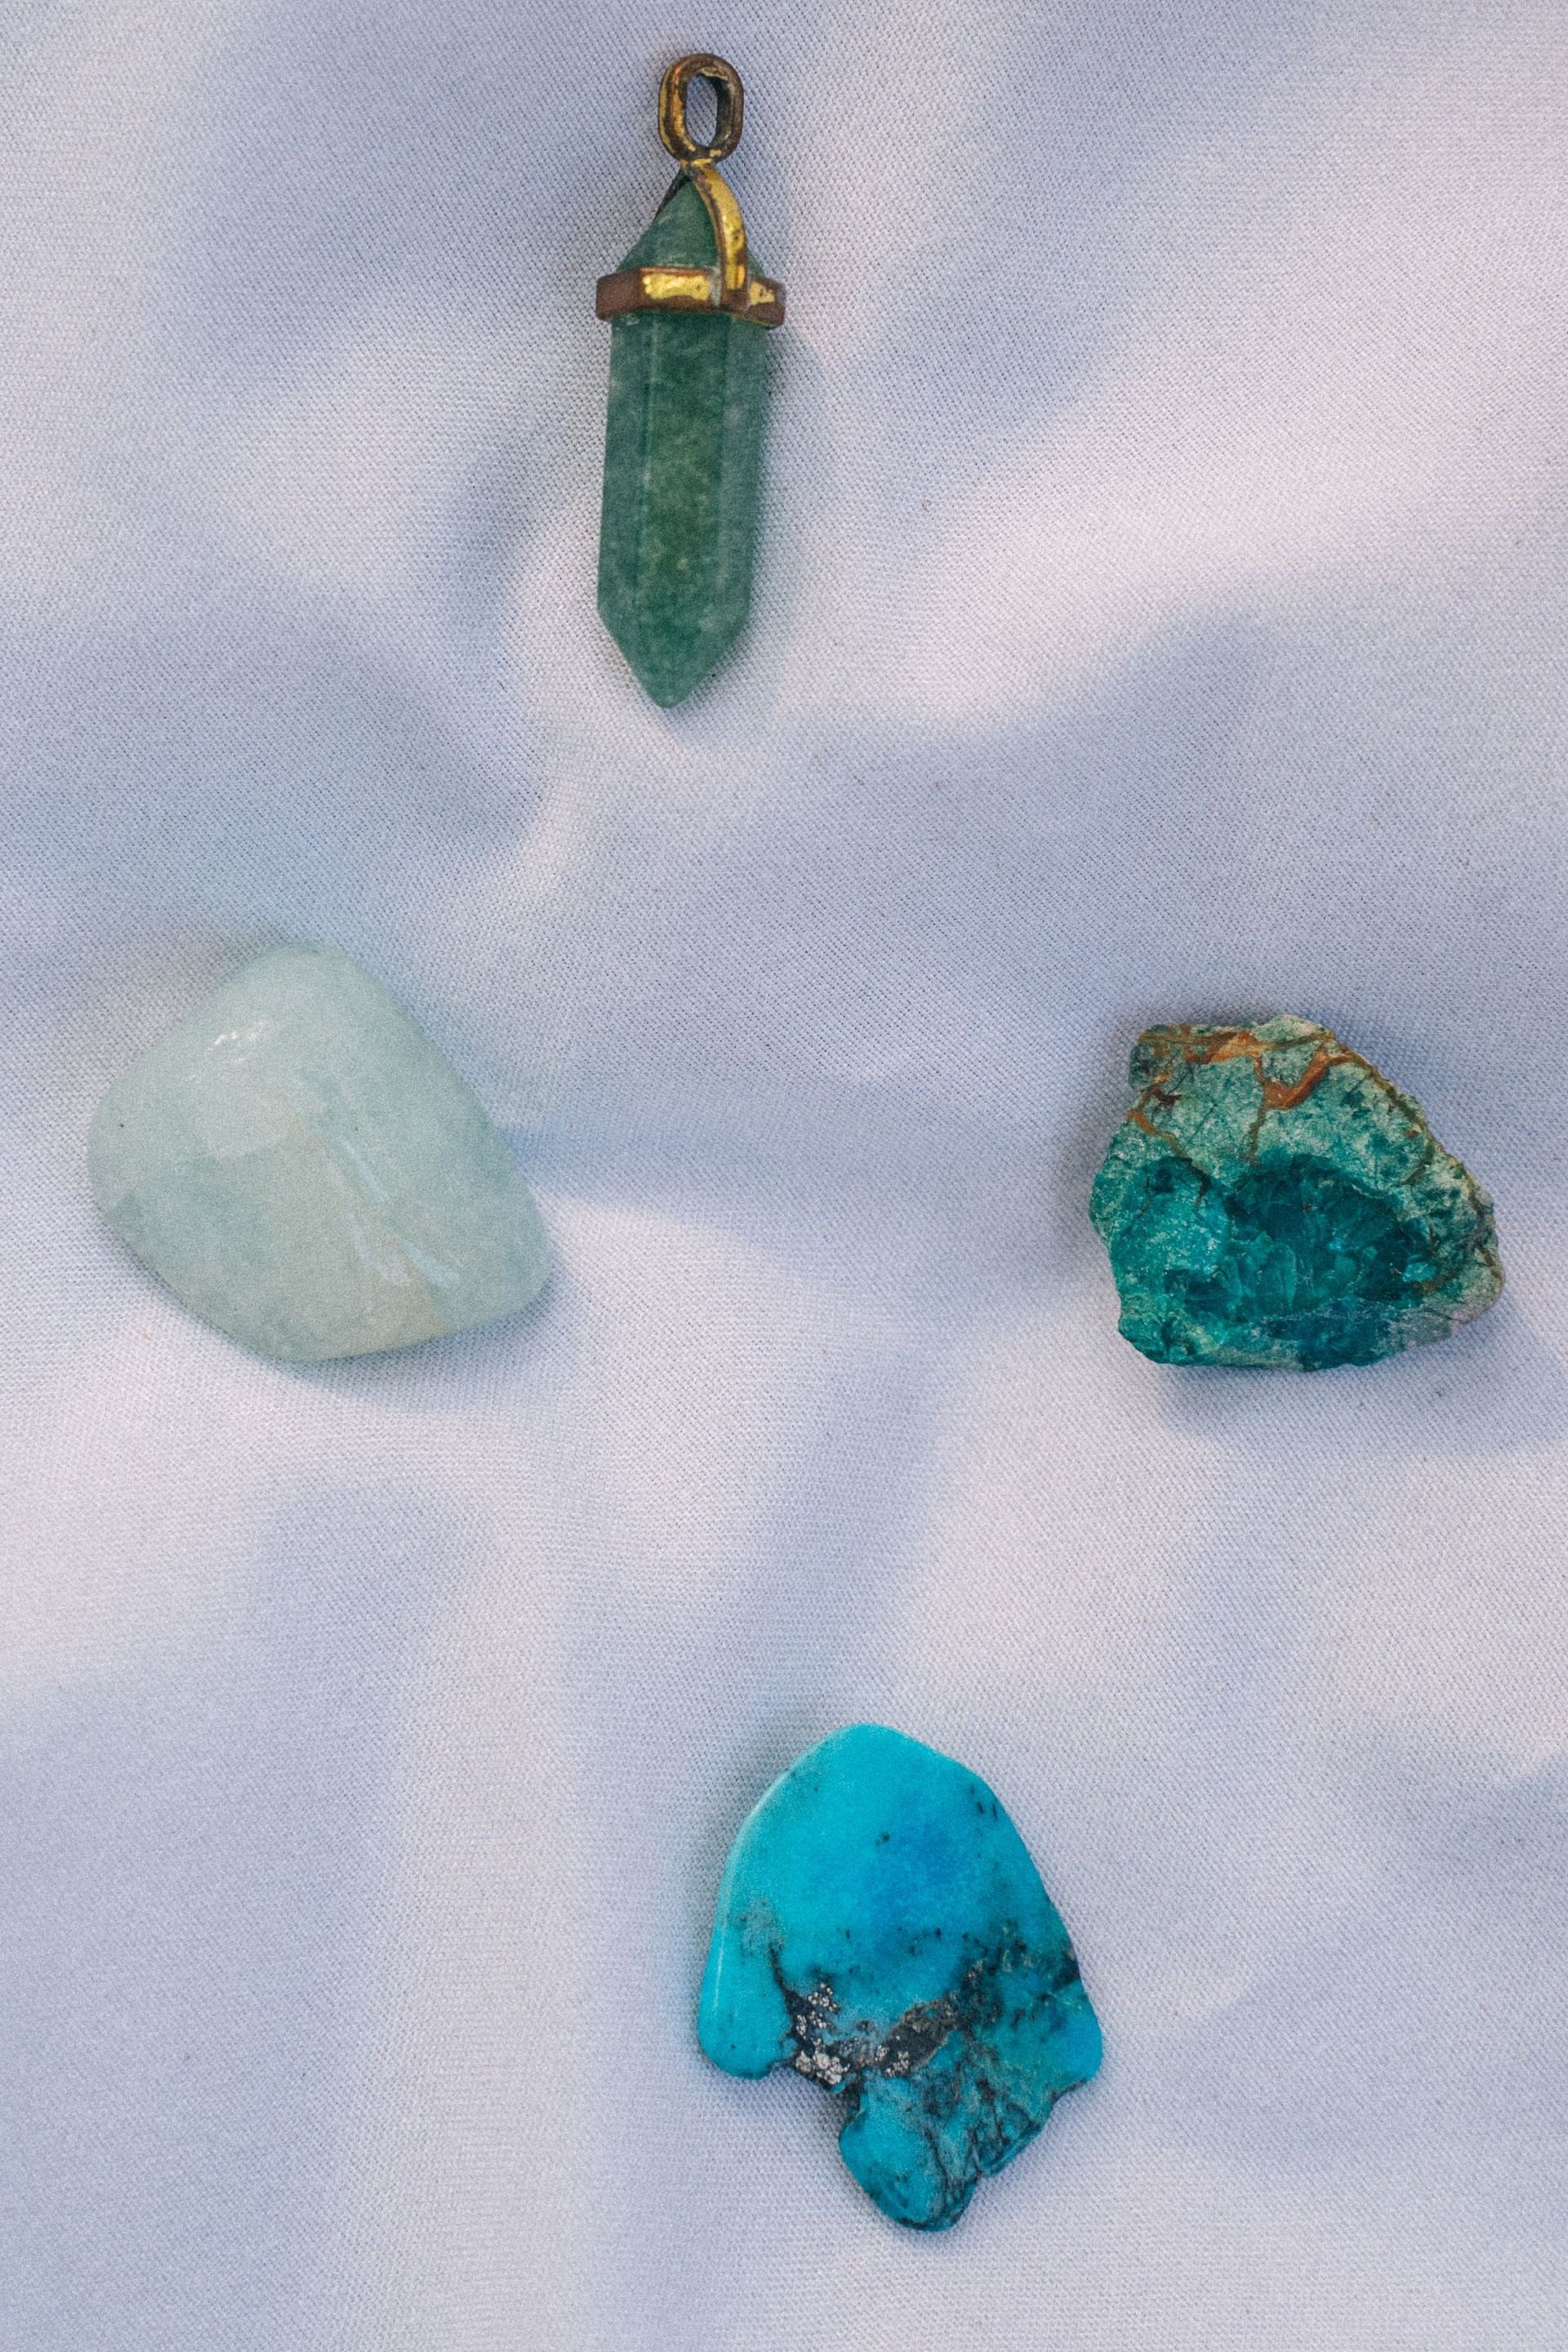 Emerald stone is believed to promote physical healing in the body. (Image via Pexels)